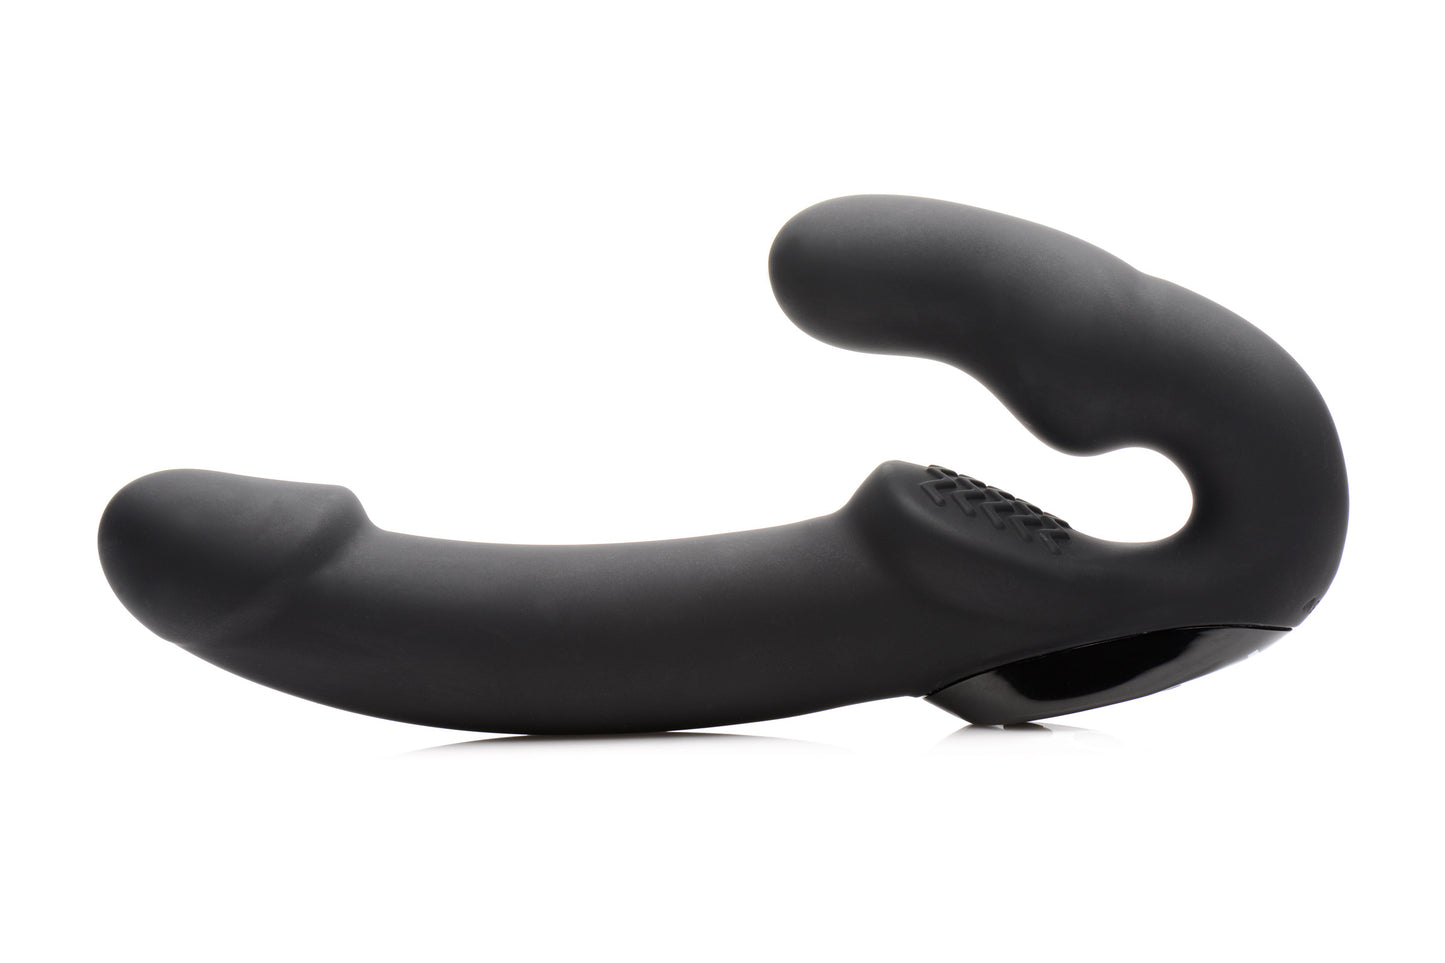 Urge Silicone Strapless Strap On With Remote- Black